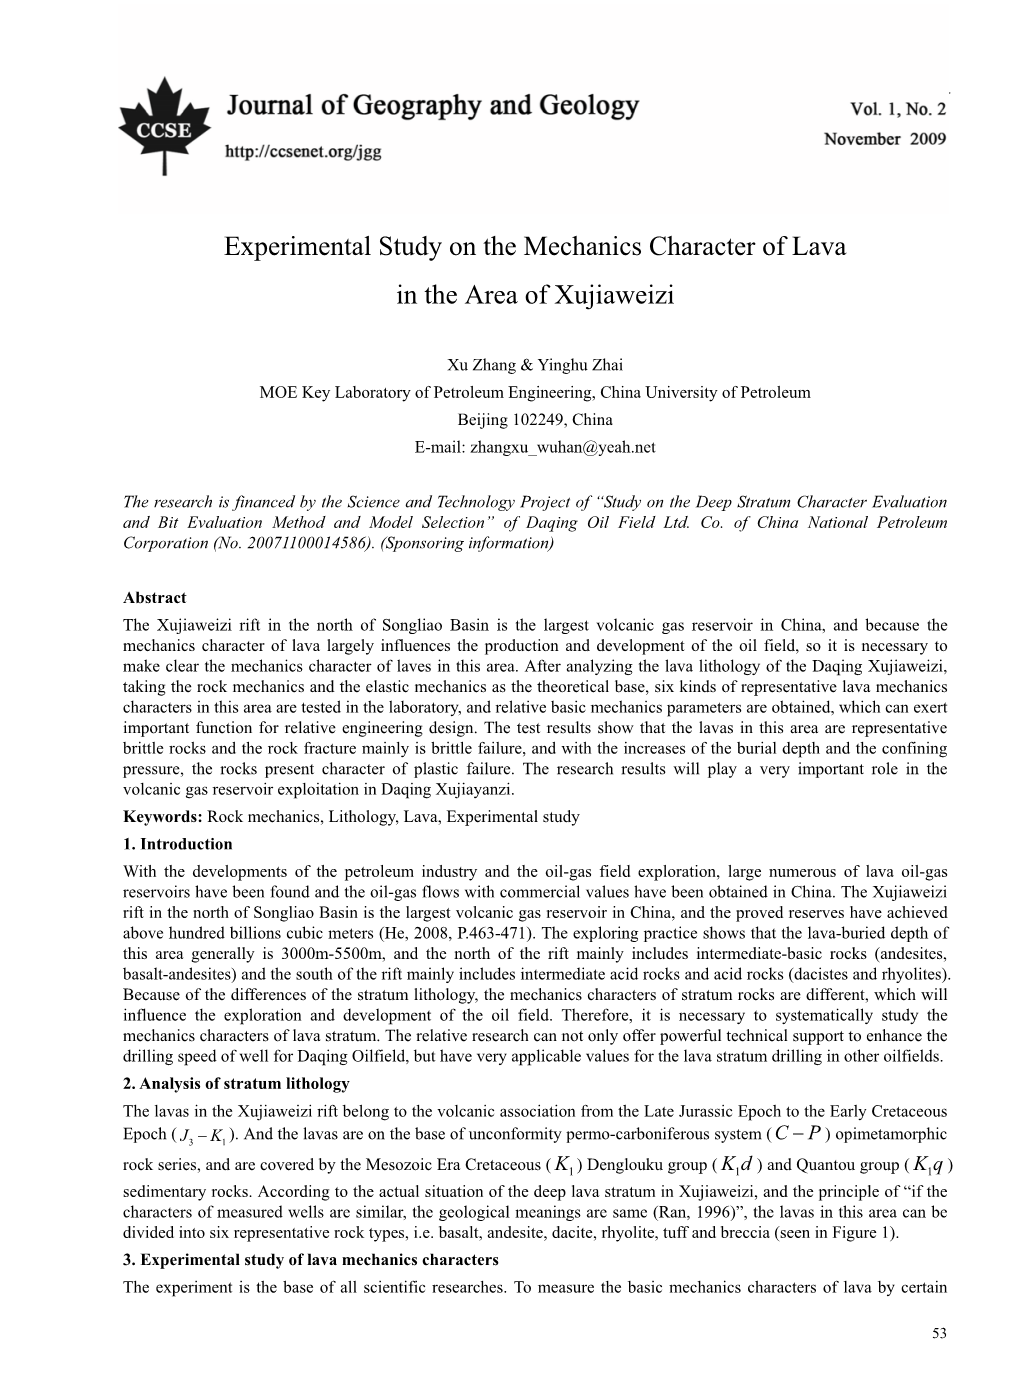 Experimental Study on the Mechanics Character of Lava in the Area of Xujiaweizi